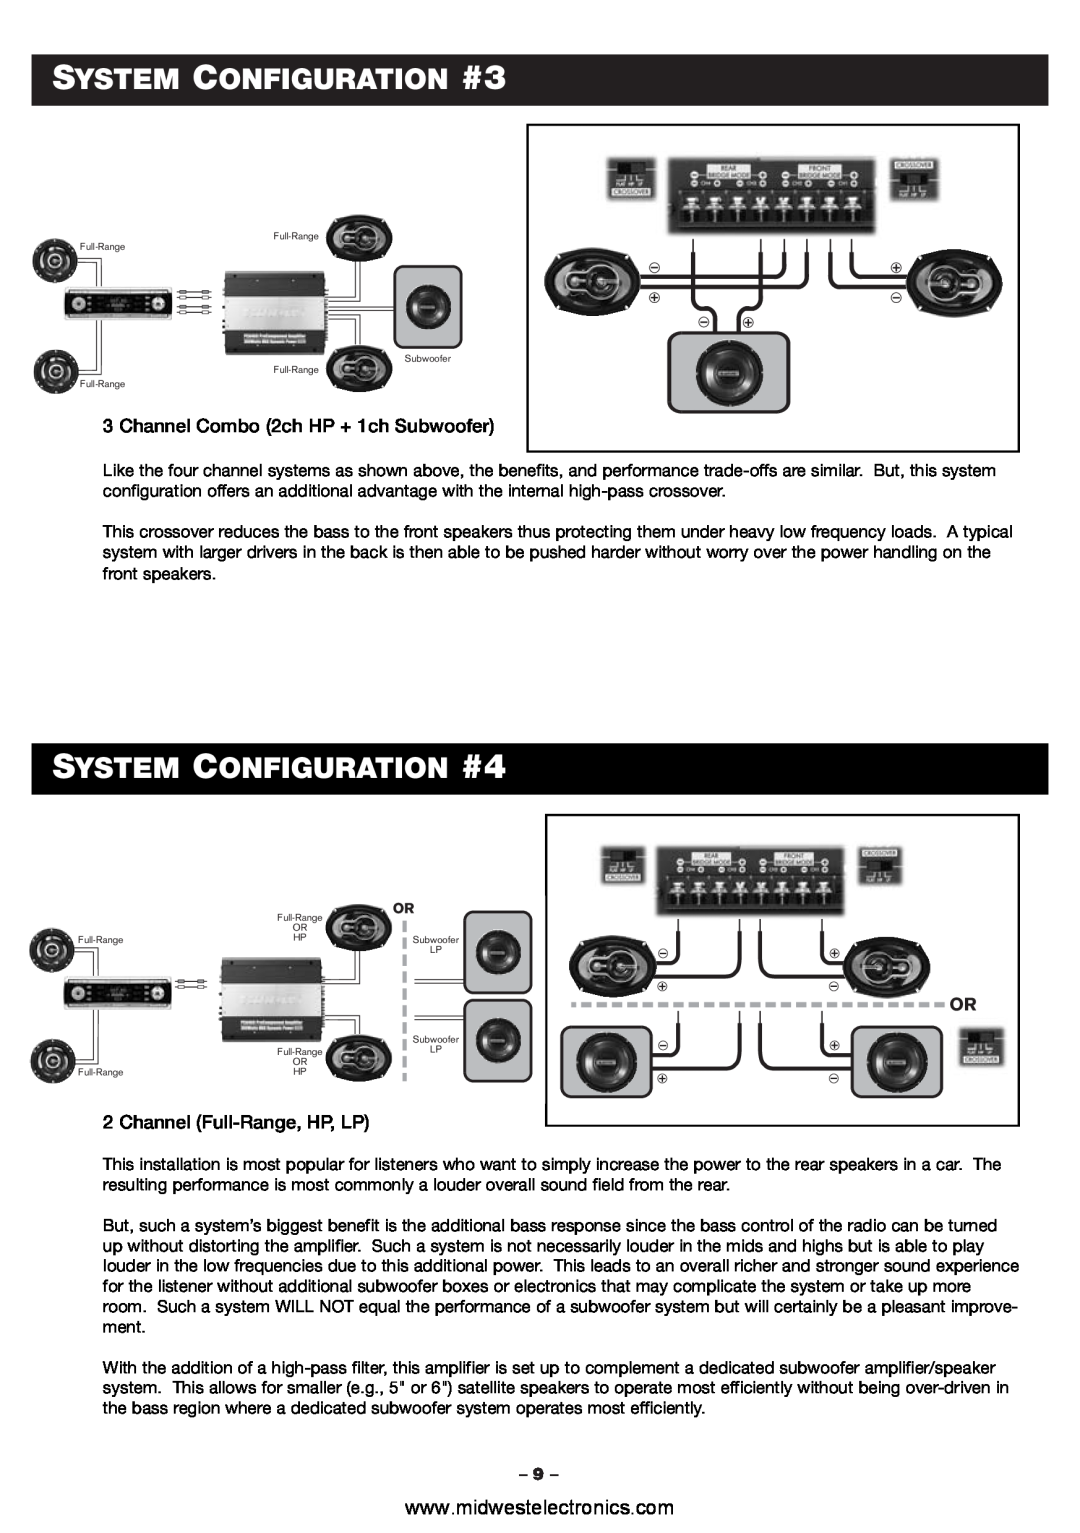 Blaupunkt PCA460 manual SYSTEM CONFIGURATION #3, SYSTEM CONFIGURATION #4, Channel Combo 2ch HP + 1ch Subwoofer 